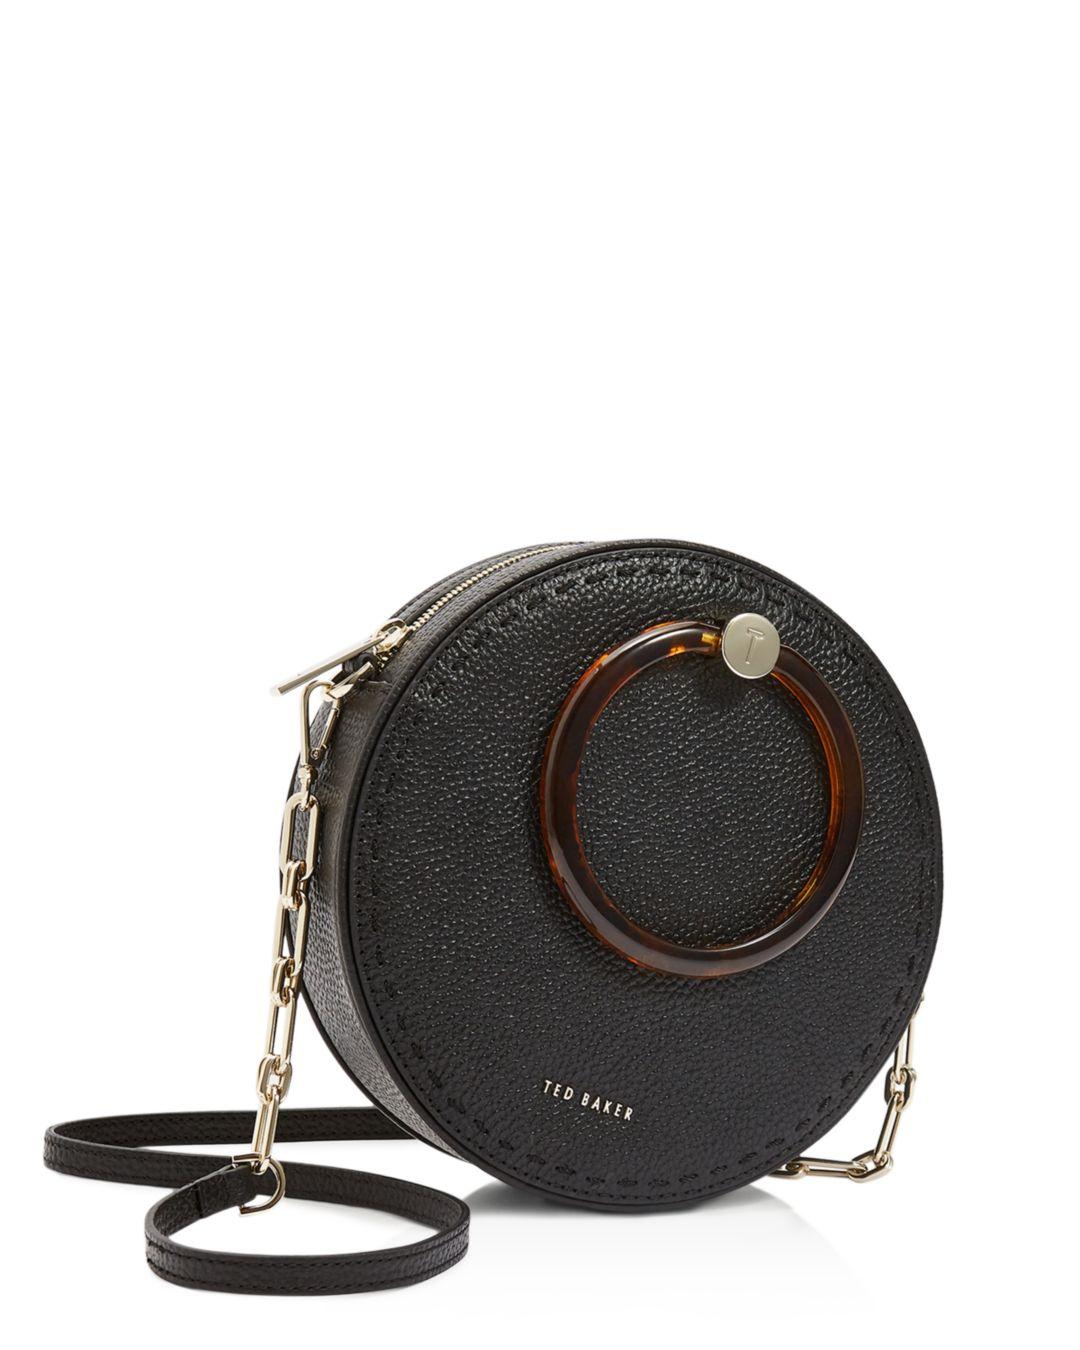 Ted Baker Leather Circle Cross Body Bag in Black | Lyst